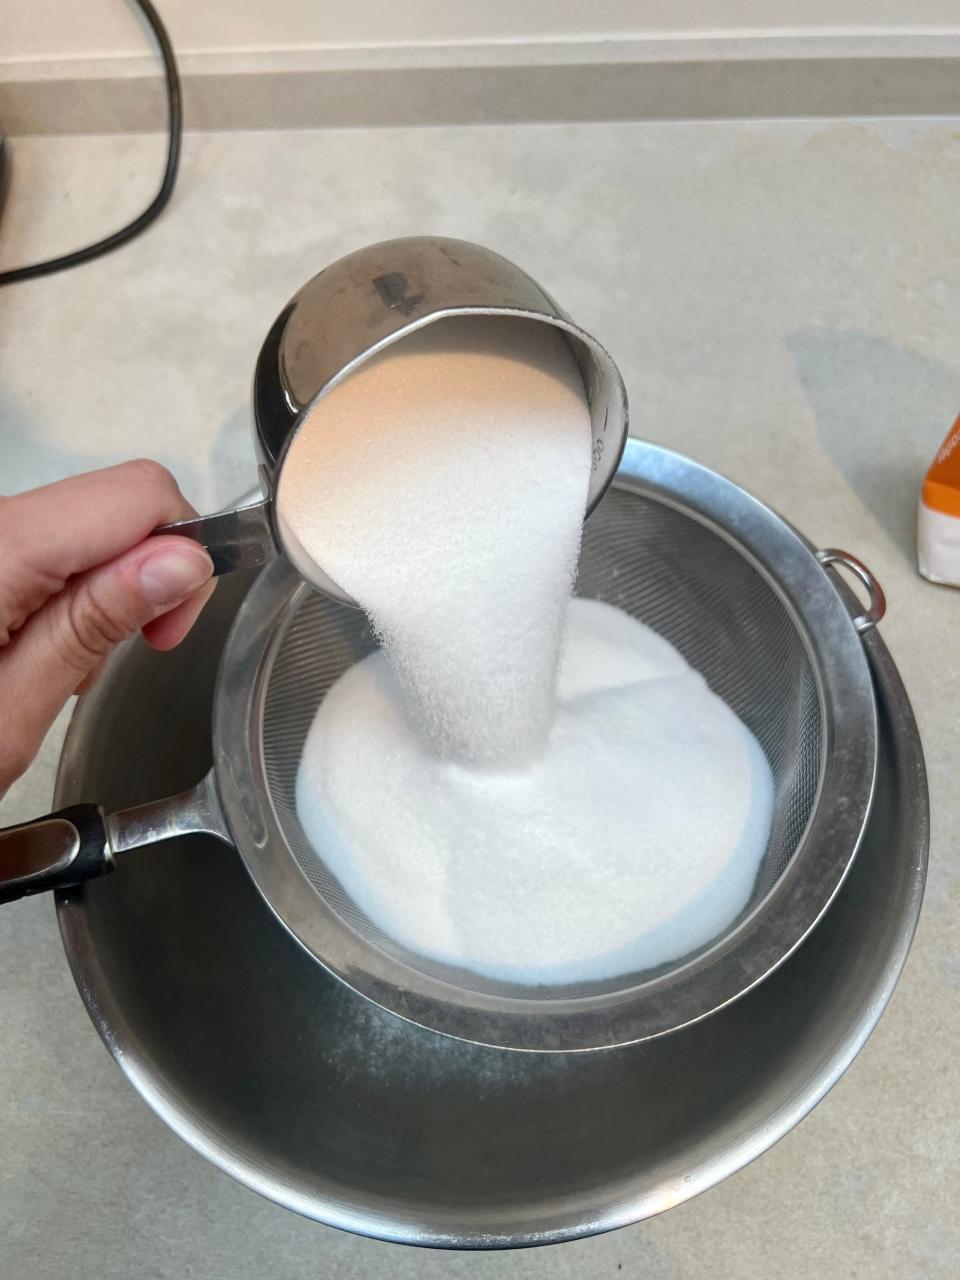 A cup of flour, sugar, and baking soda being poured into a sieve.